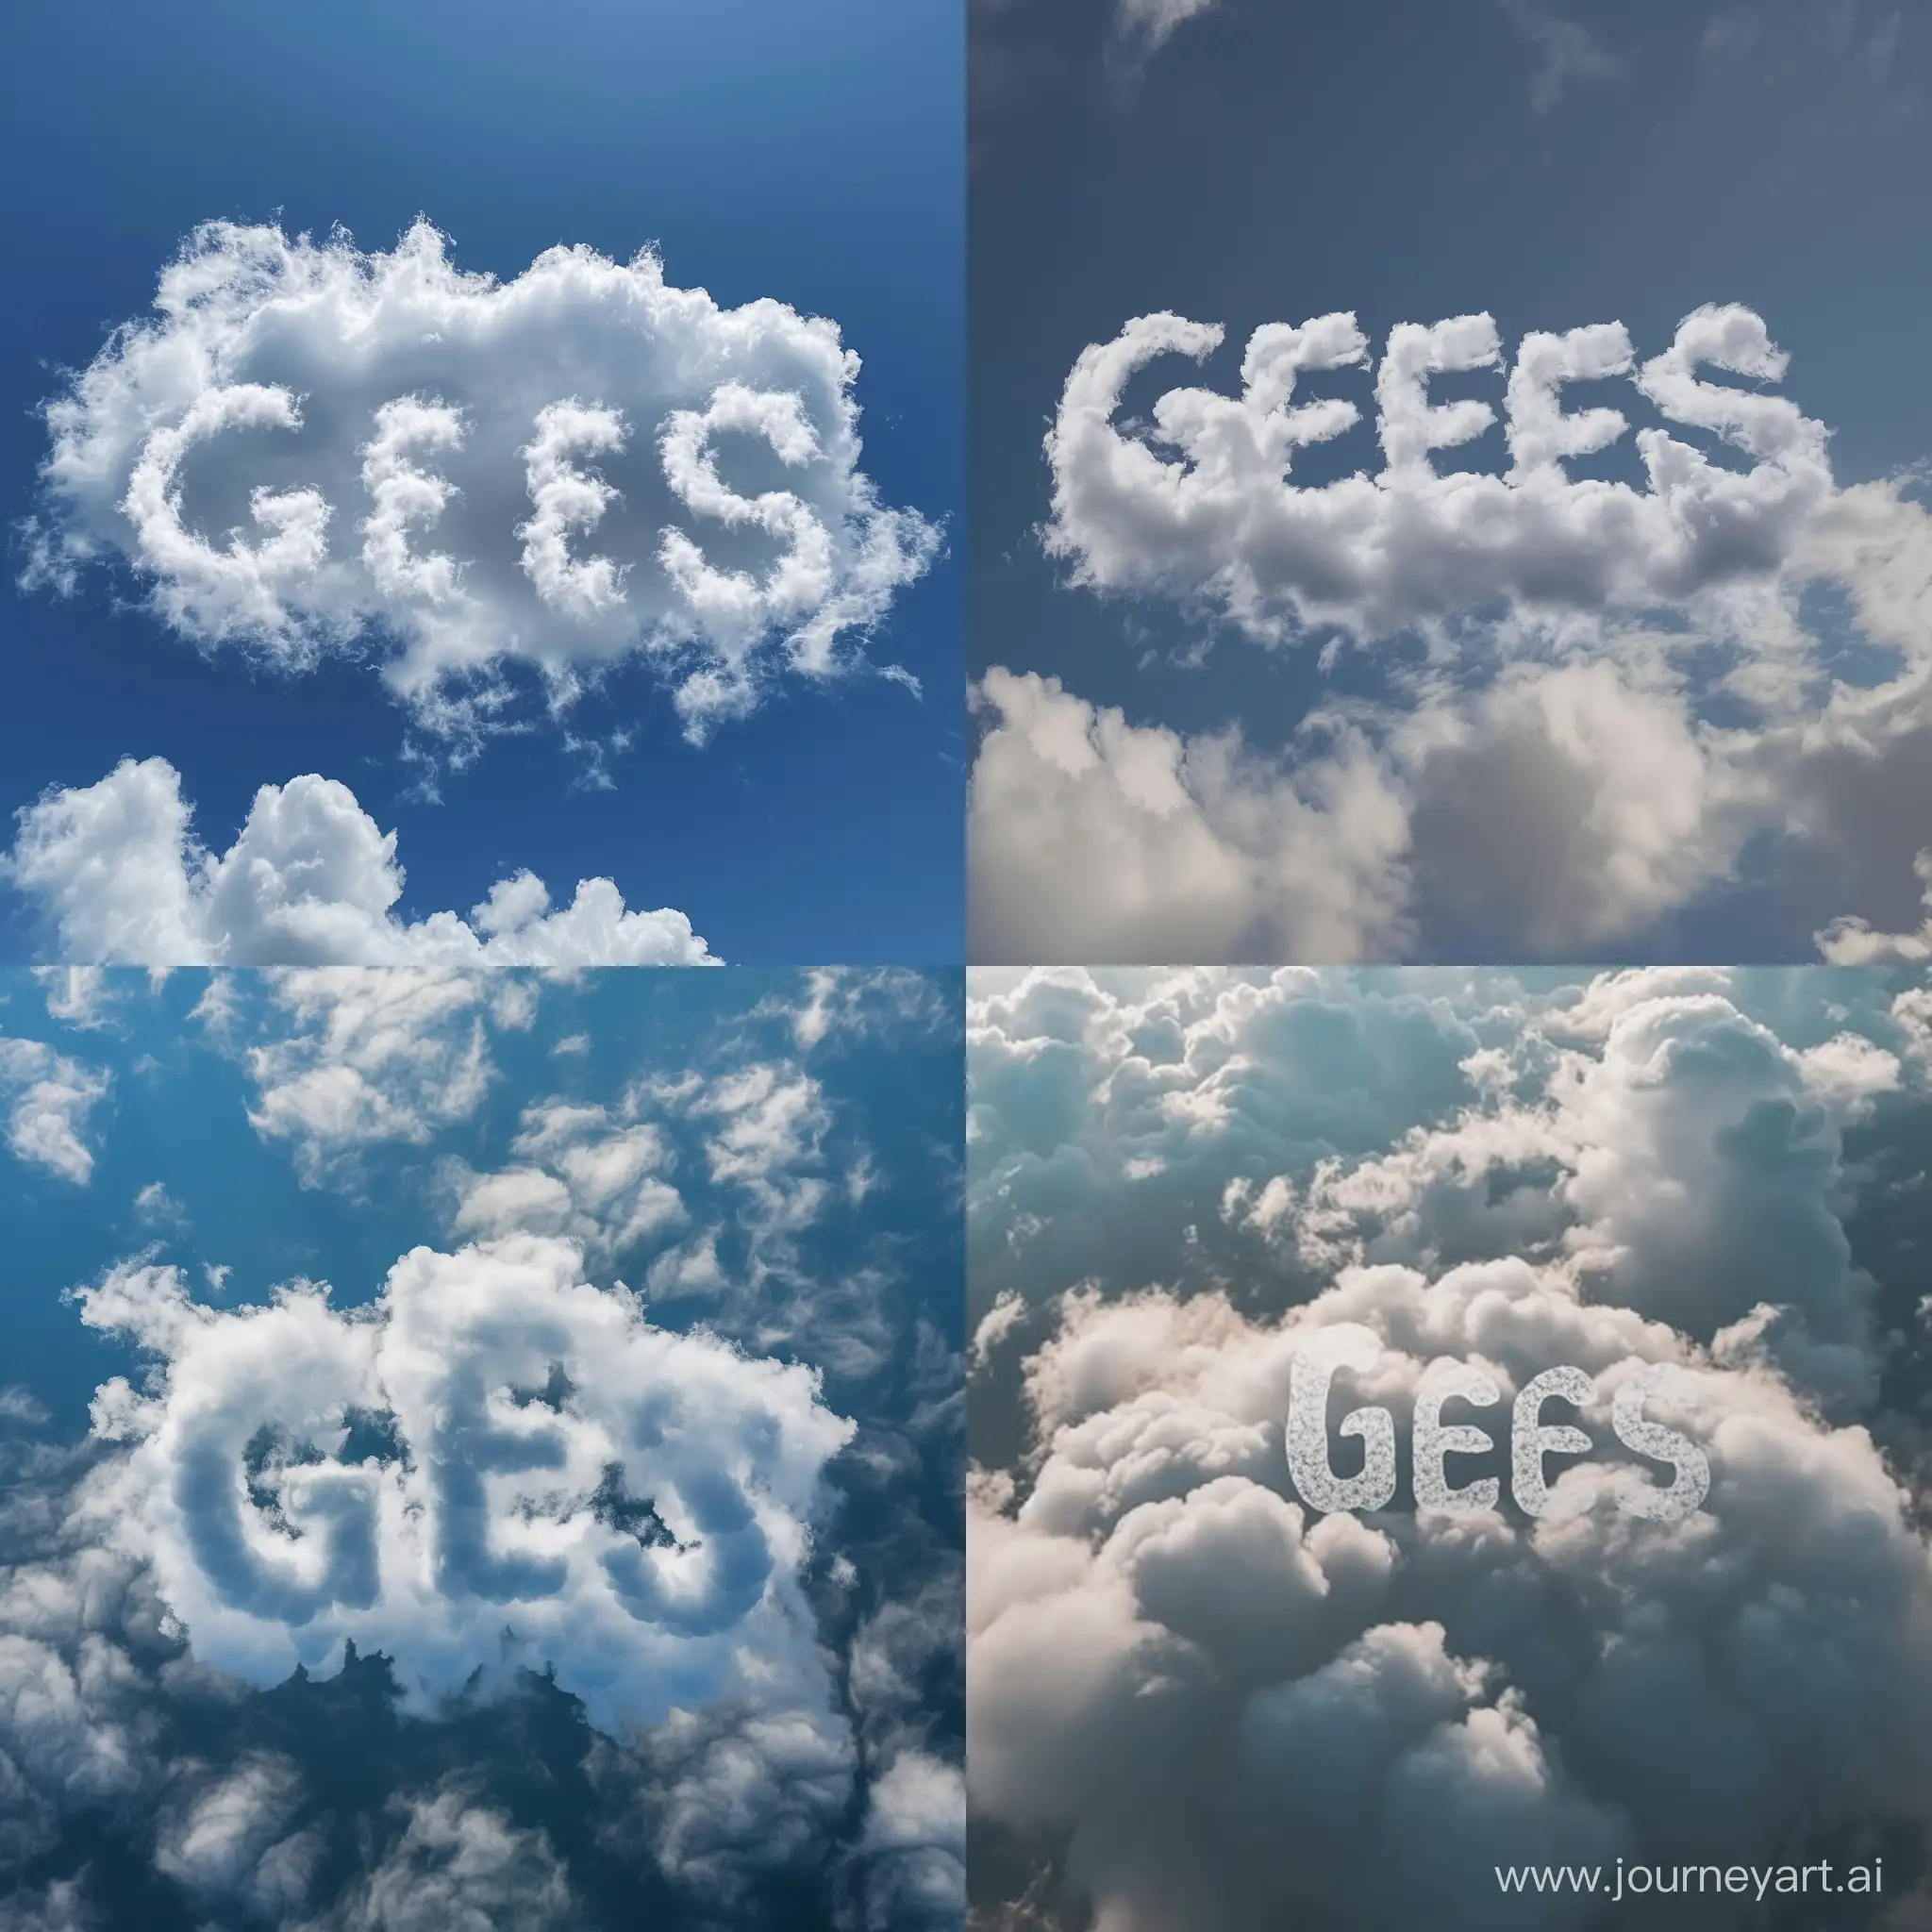 Whimsical-Gees-Cloud-Art-Playful-Imagery-in-a-11-Aspect-Ratio